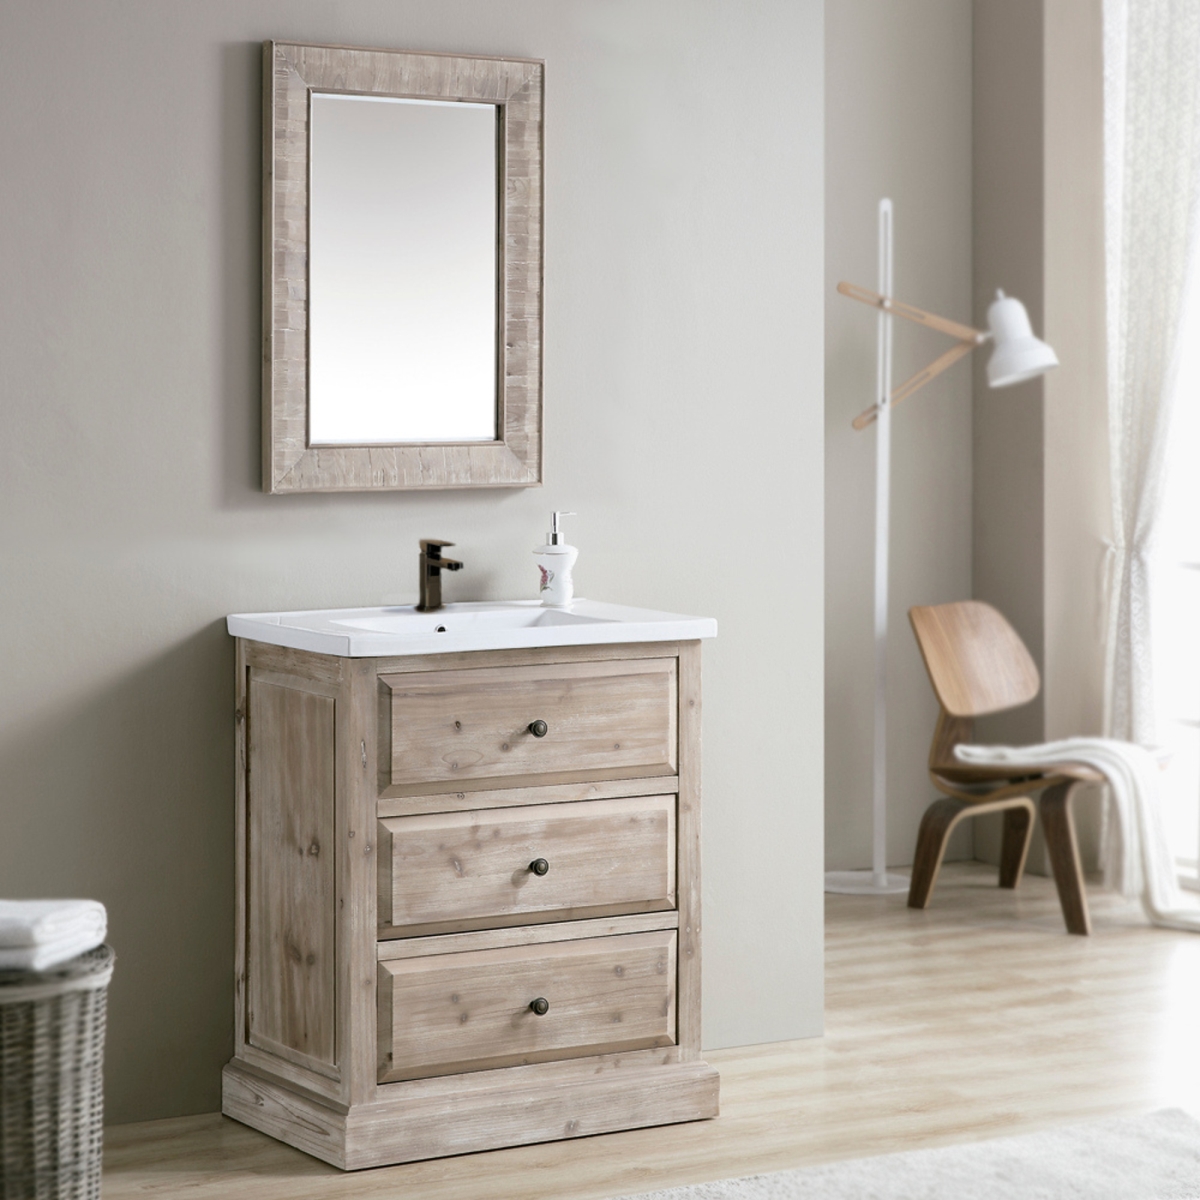 Wk1830 30 In. Solid Fir Single Sink Vanity With Ceramic Top-no Faucet